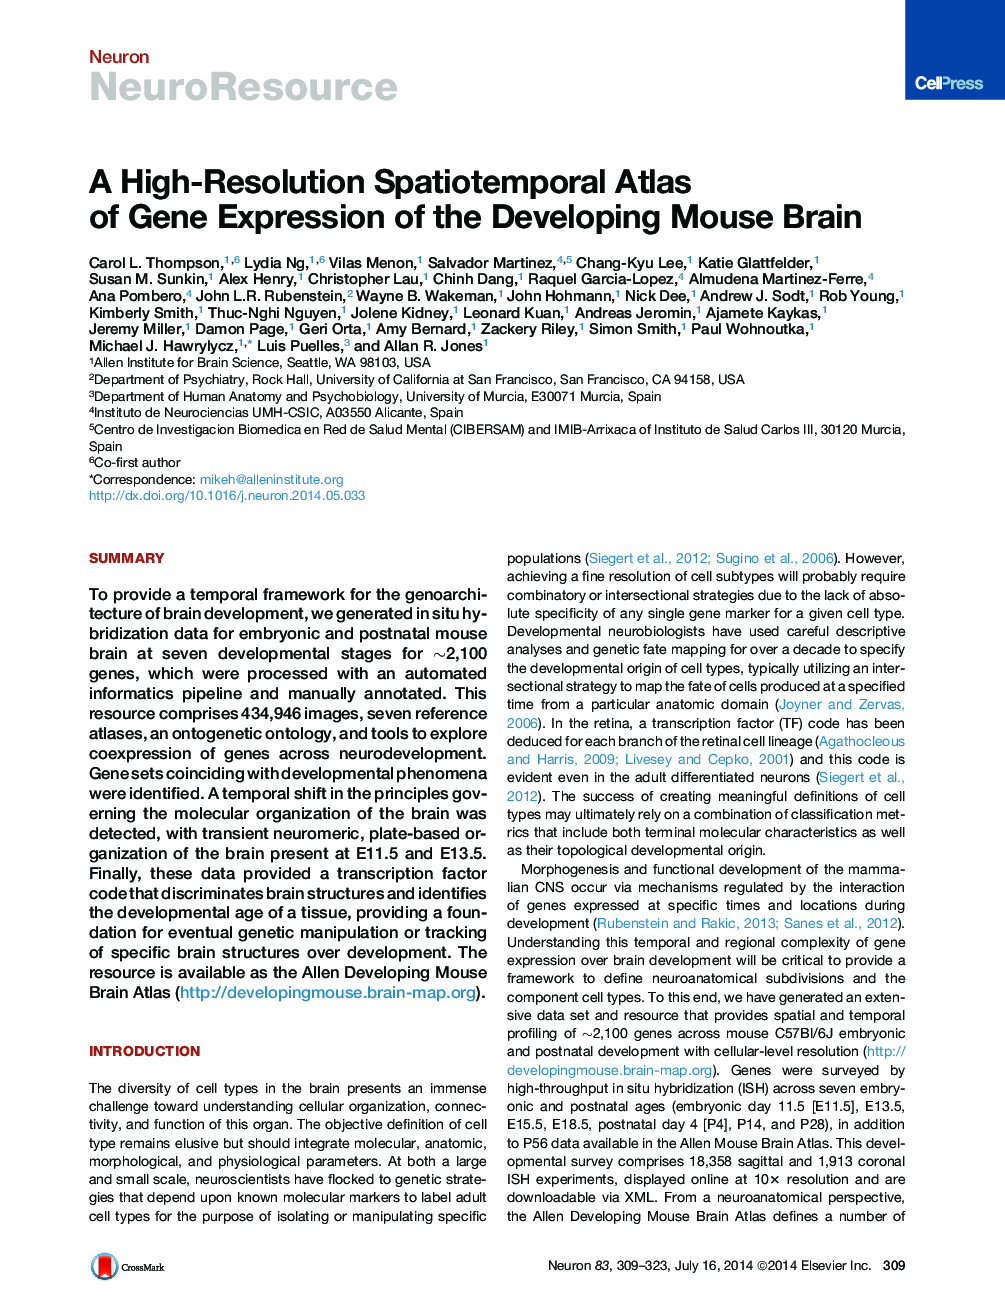 A High-Resolution Spatiotemporal Atlas of Gene Expression of the Developing Mouse Brain